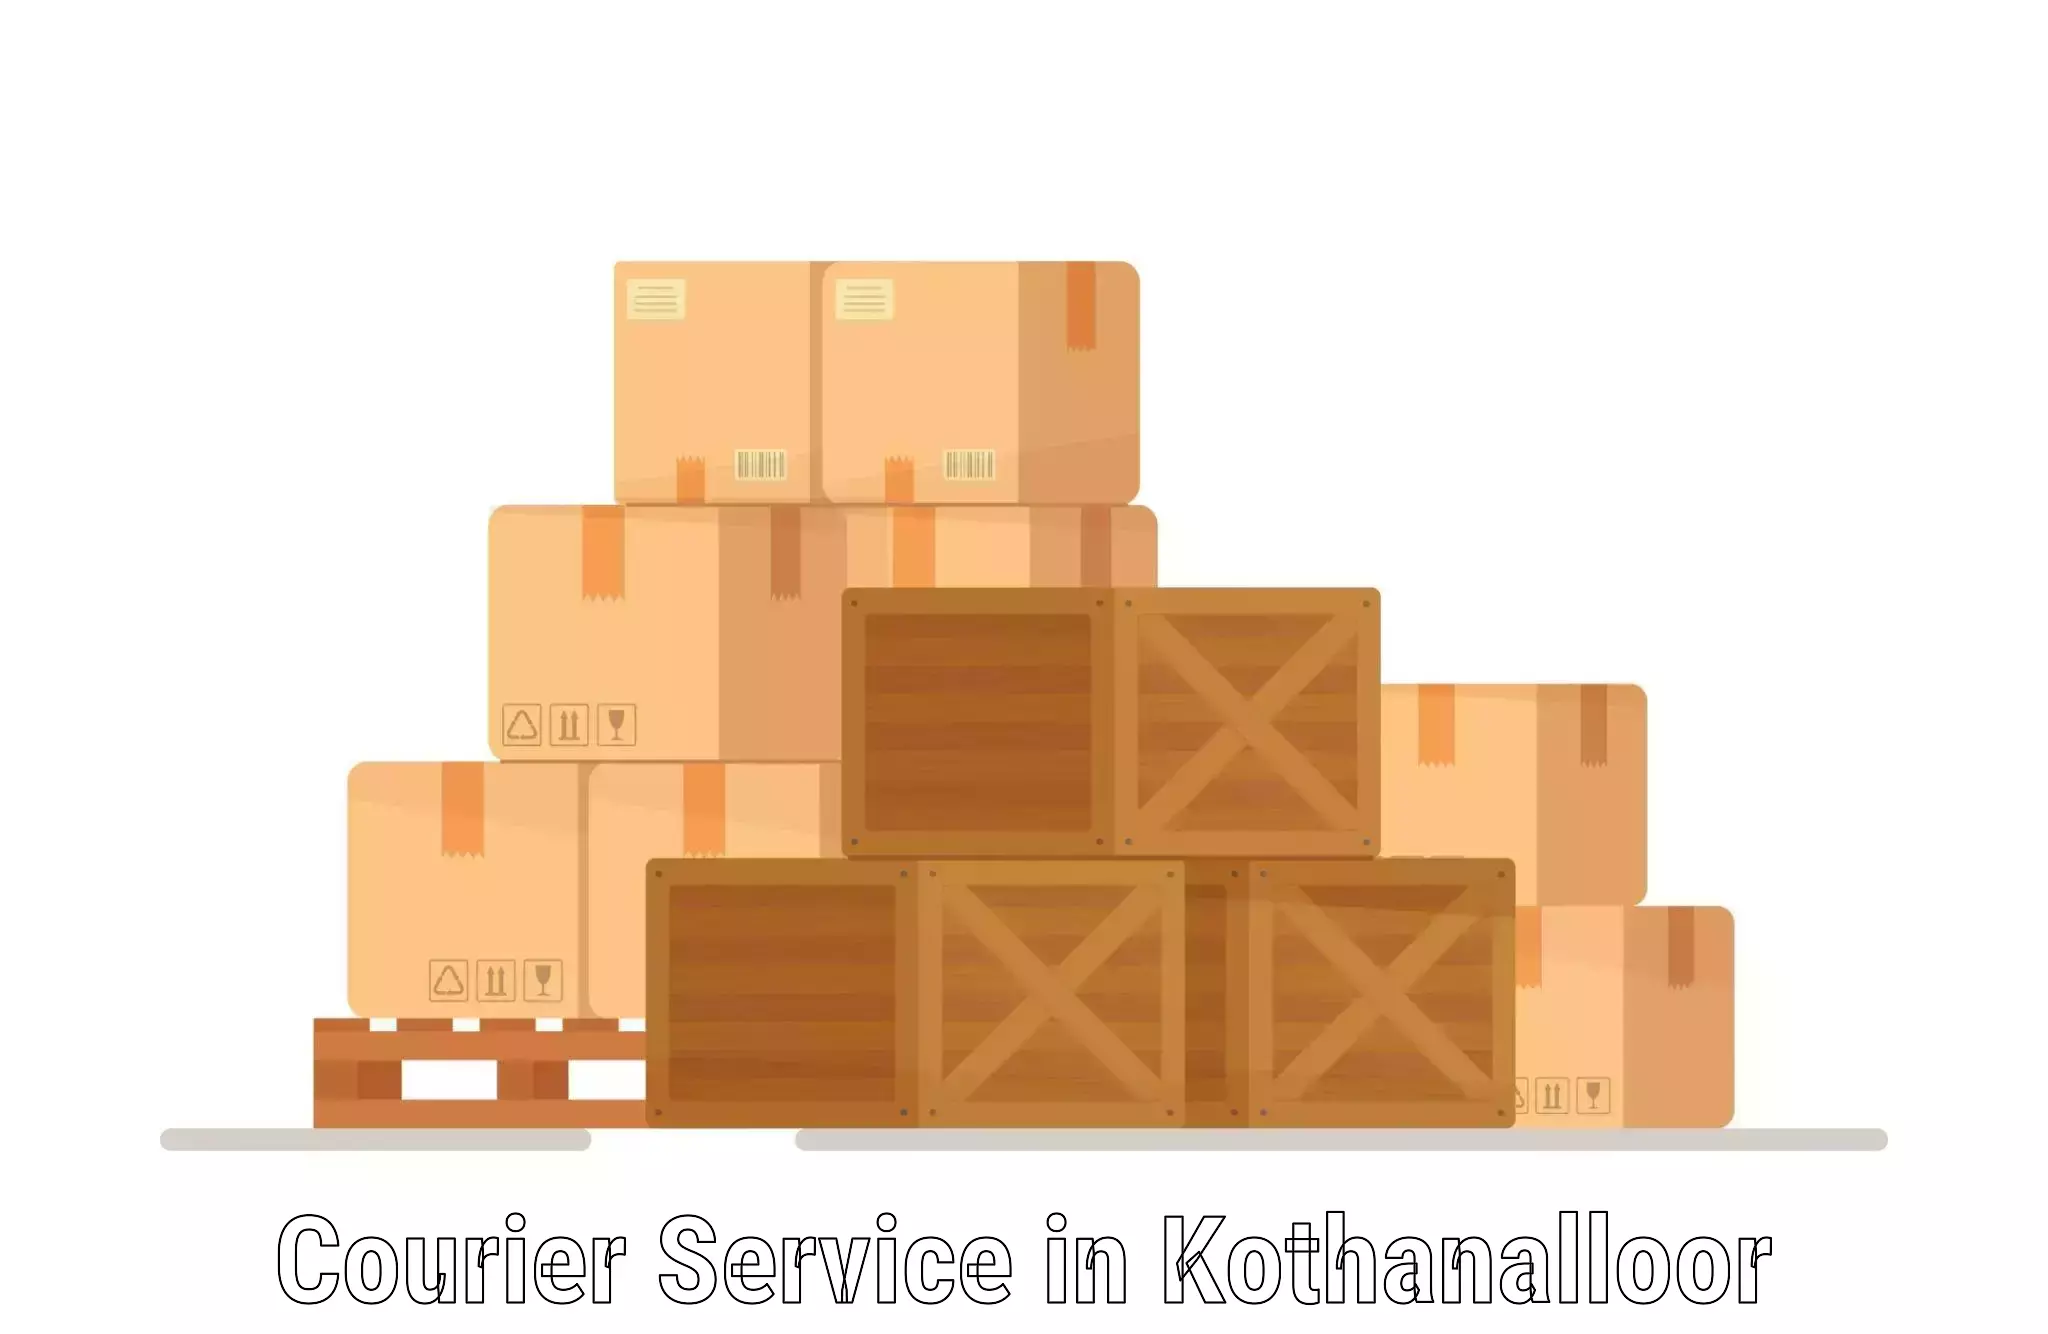 High-quality delivery services in Kothanalloor